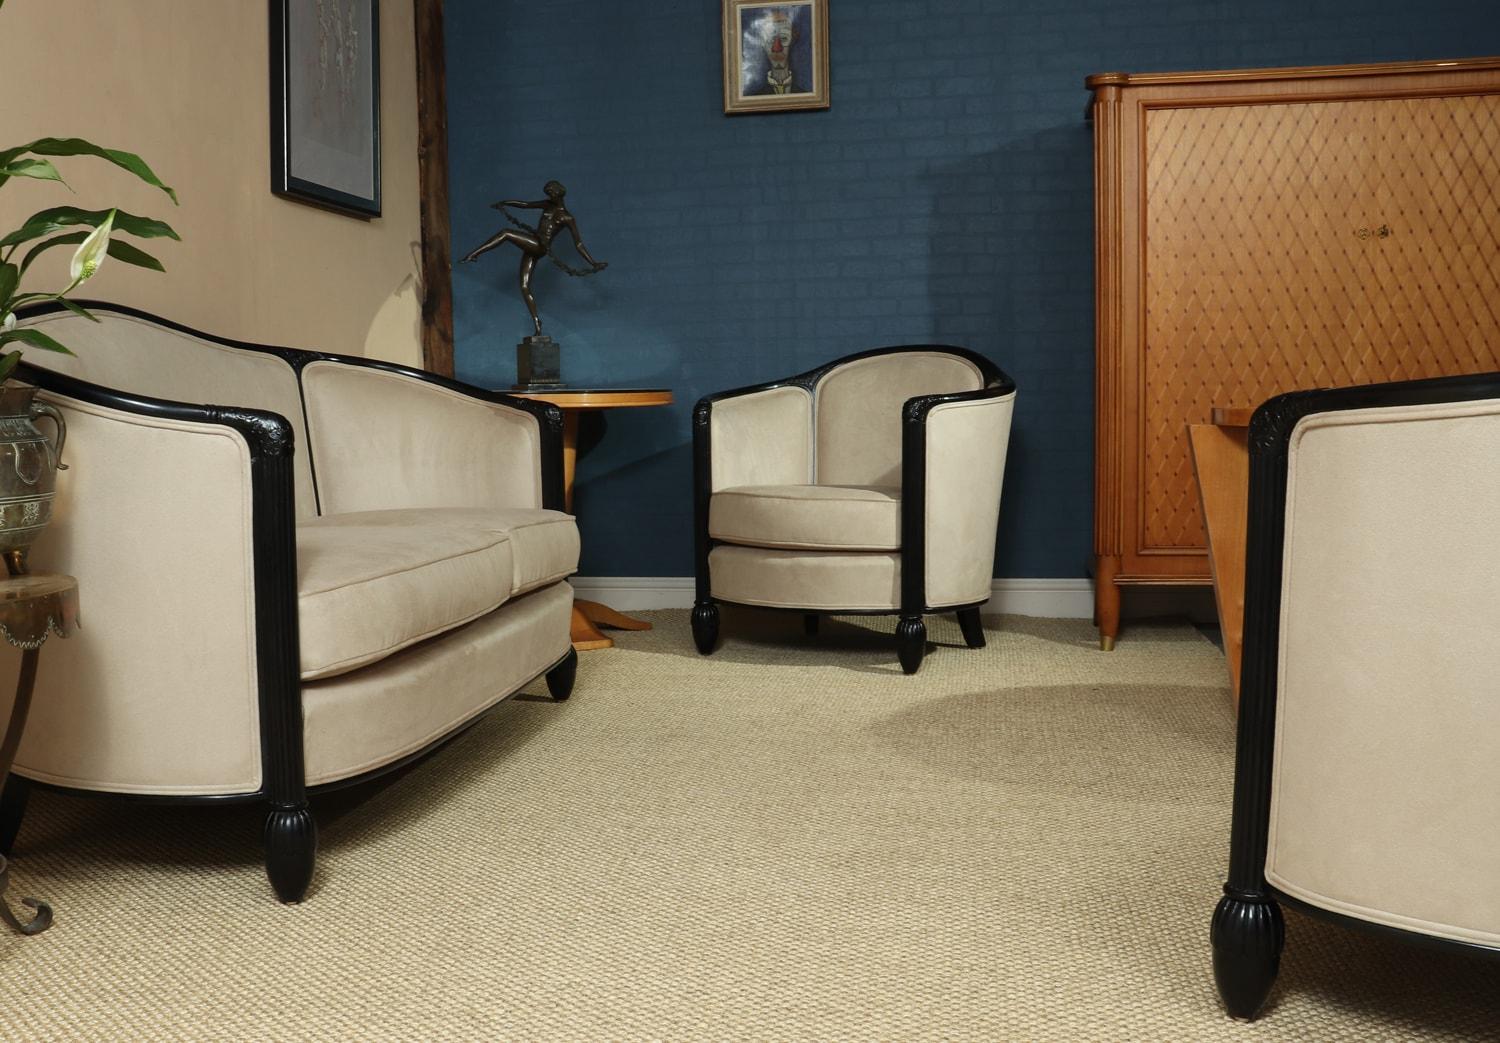 French Art Deco chairs and sofa by Paul Follot, circa 1920
A pair of chairs and sofa in ebonized solid oak with reeded front leg and carved detail, the suite has been fully upholstered in faux suede that is stain resistant and crib 5 standard, the